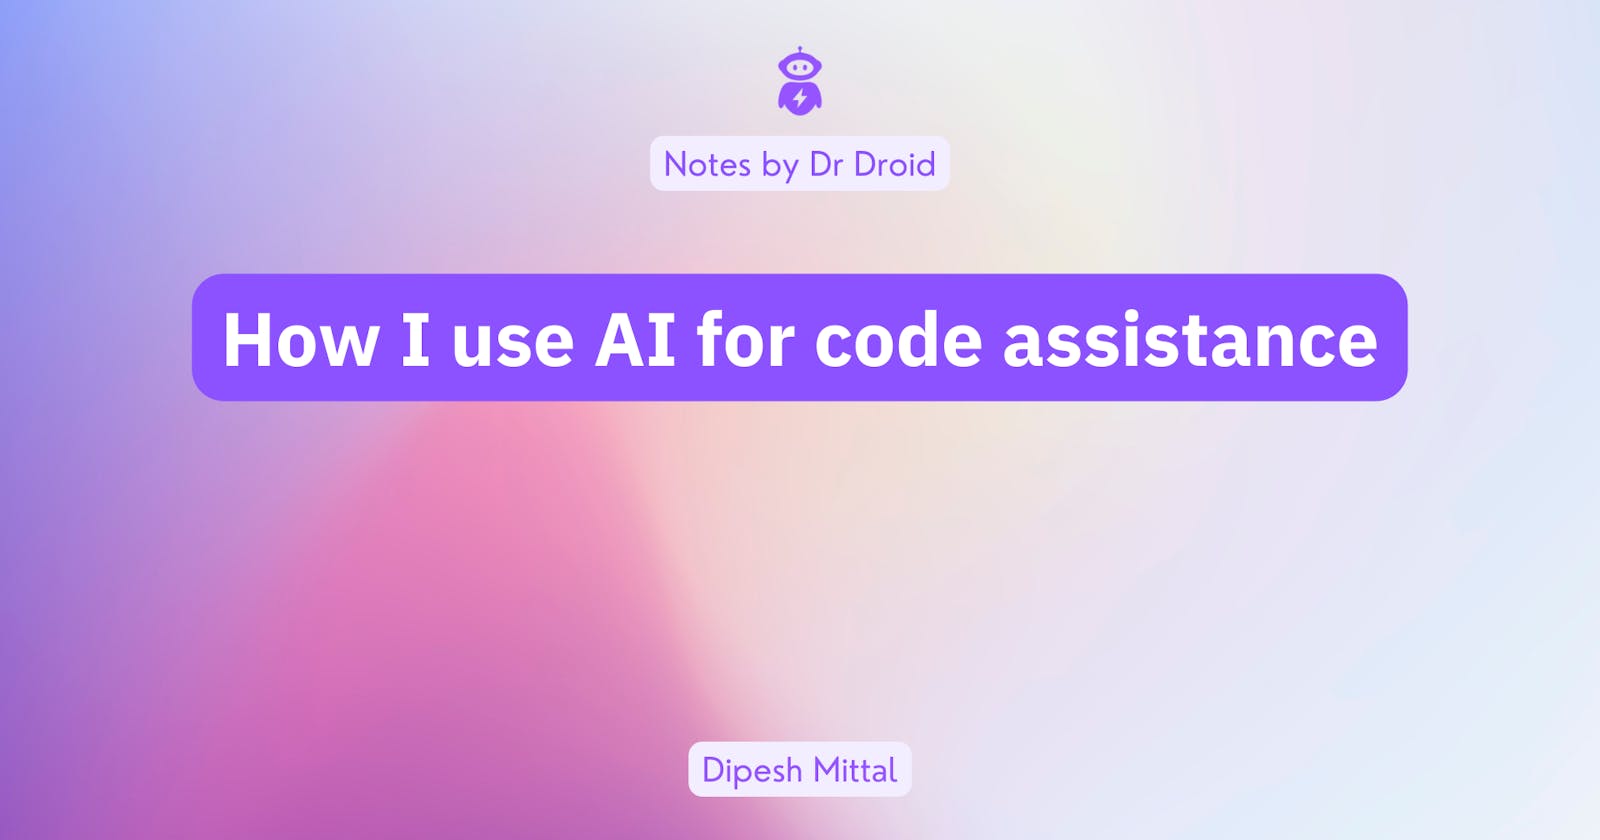 How I use AI for code assistance